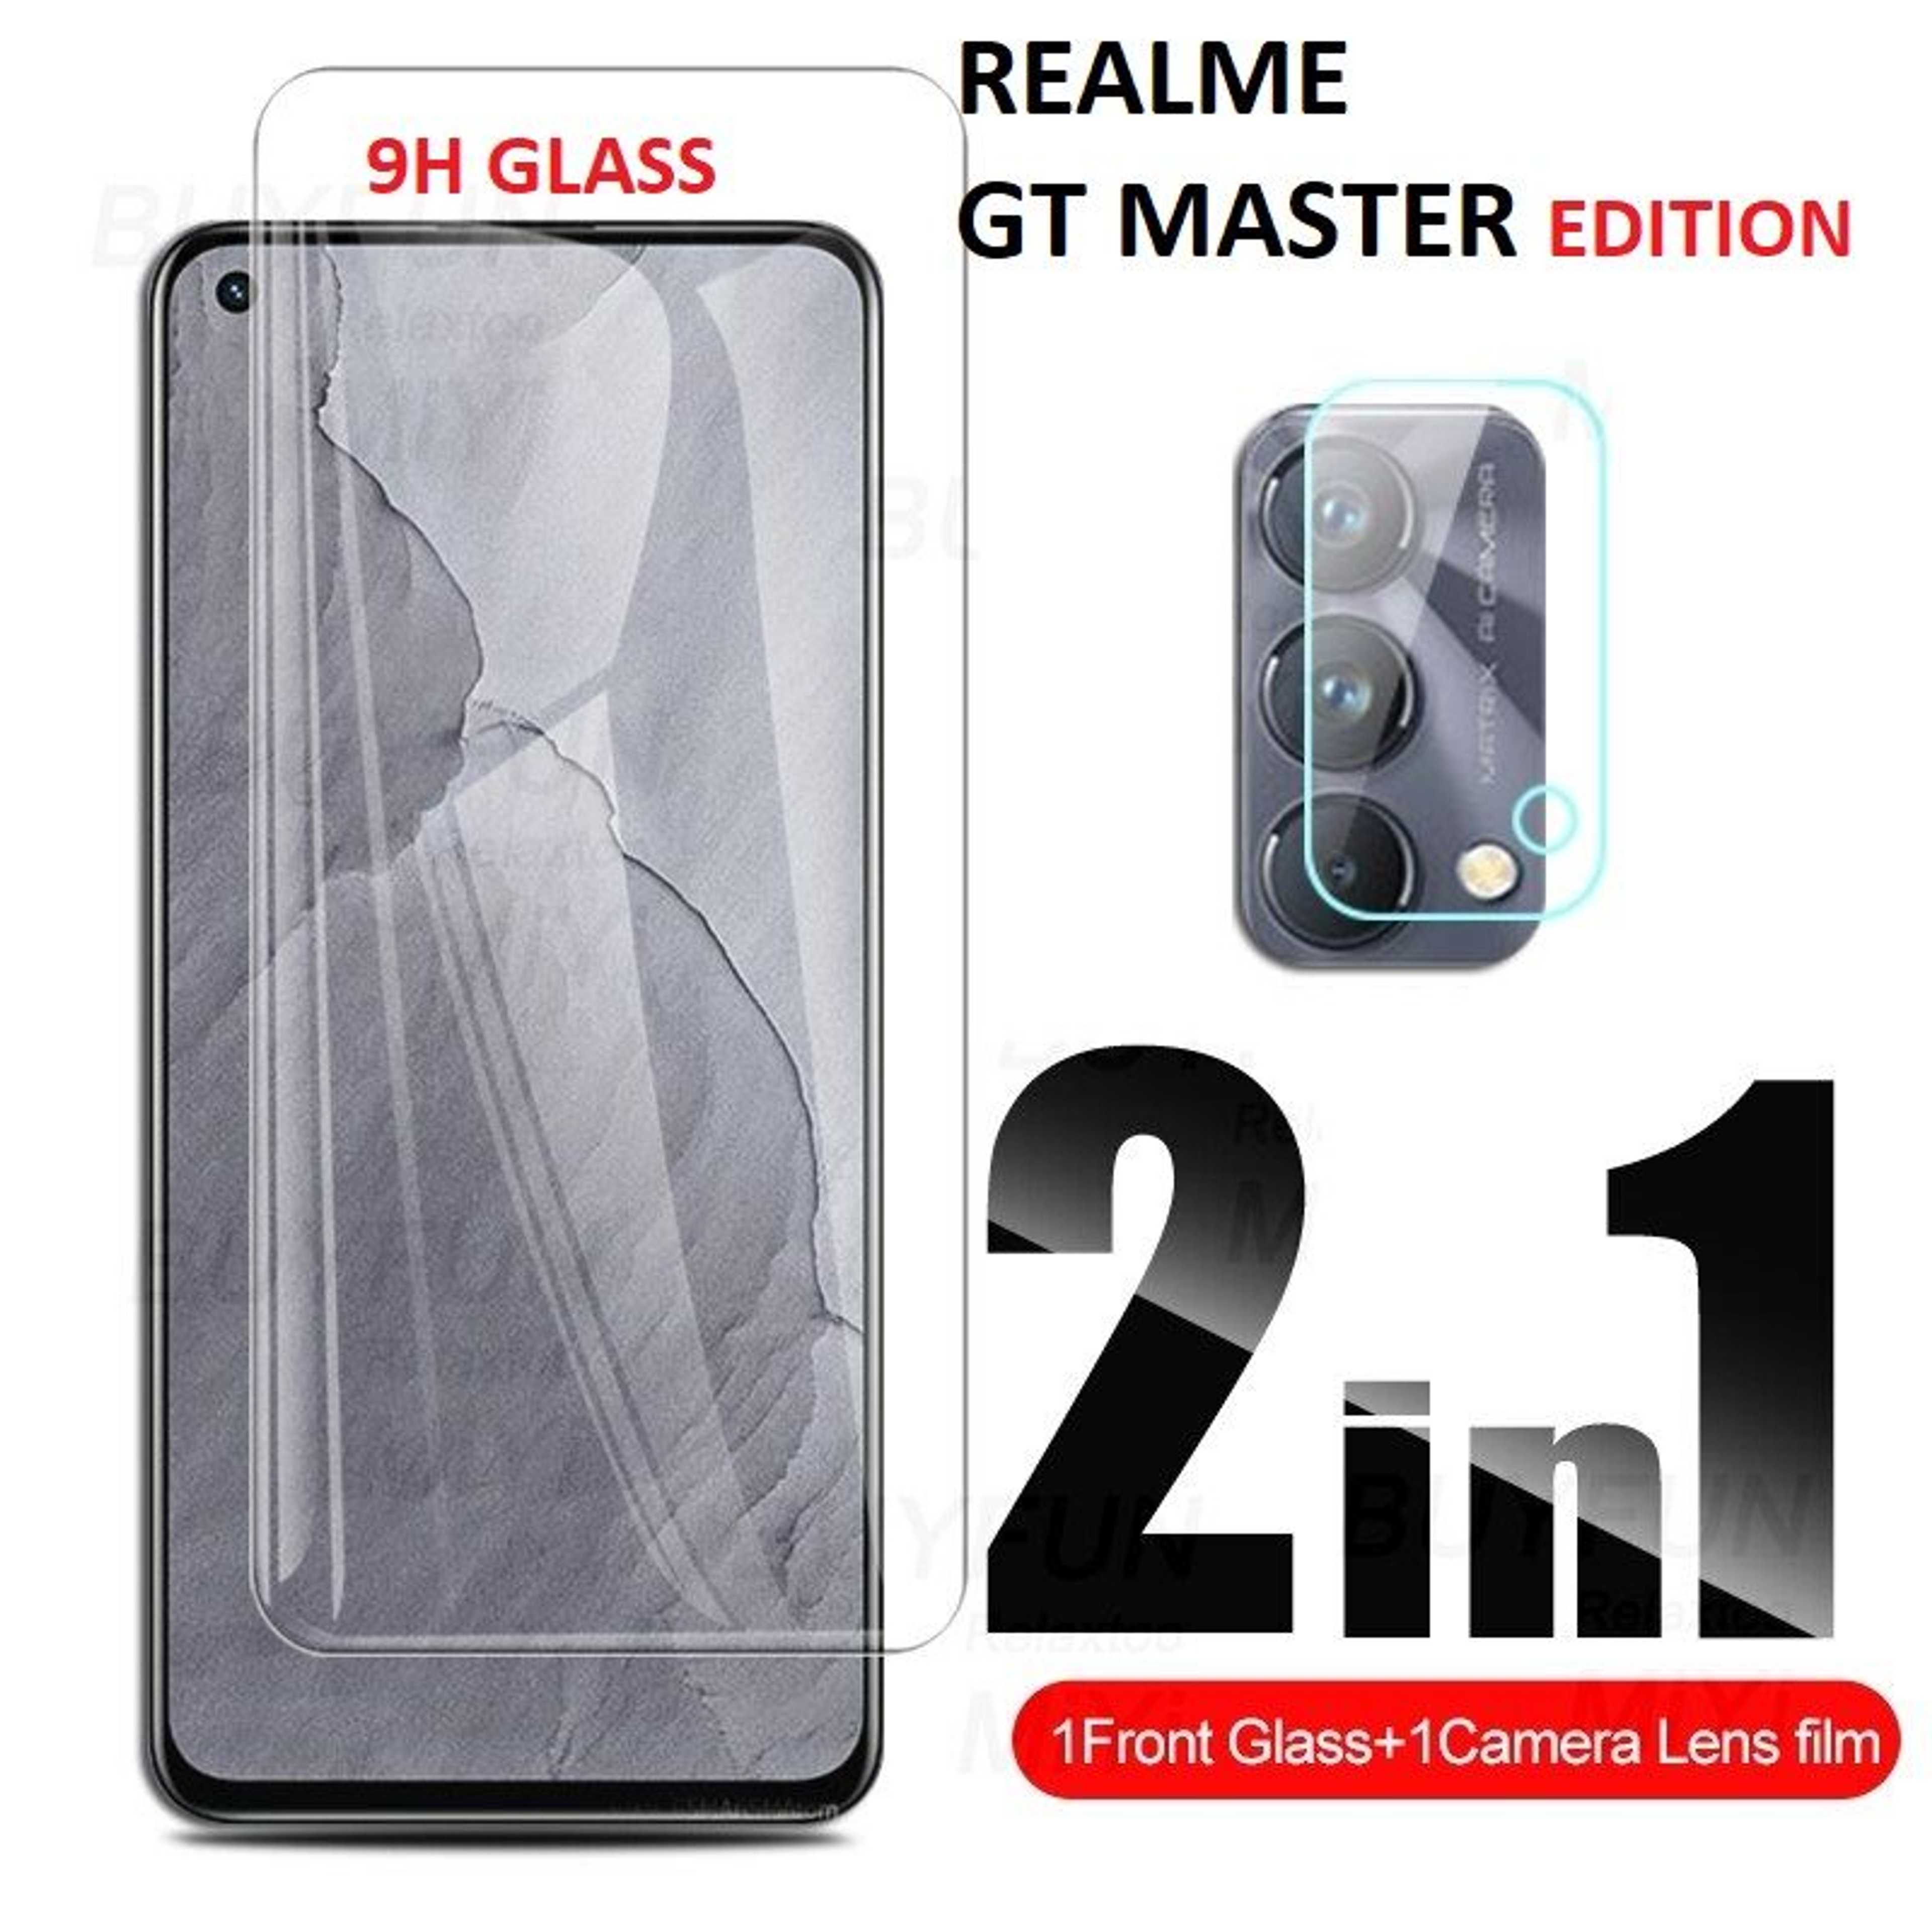 Realme_Gt_Master_Edition Screen Protector 9H Glass